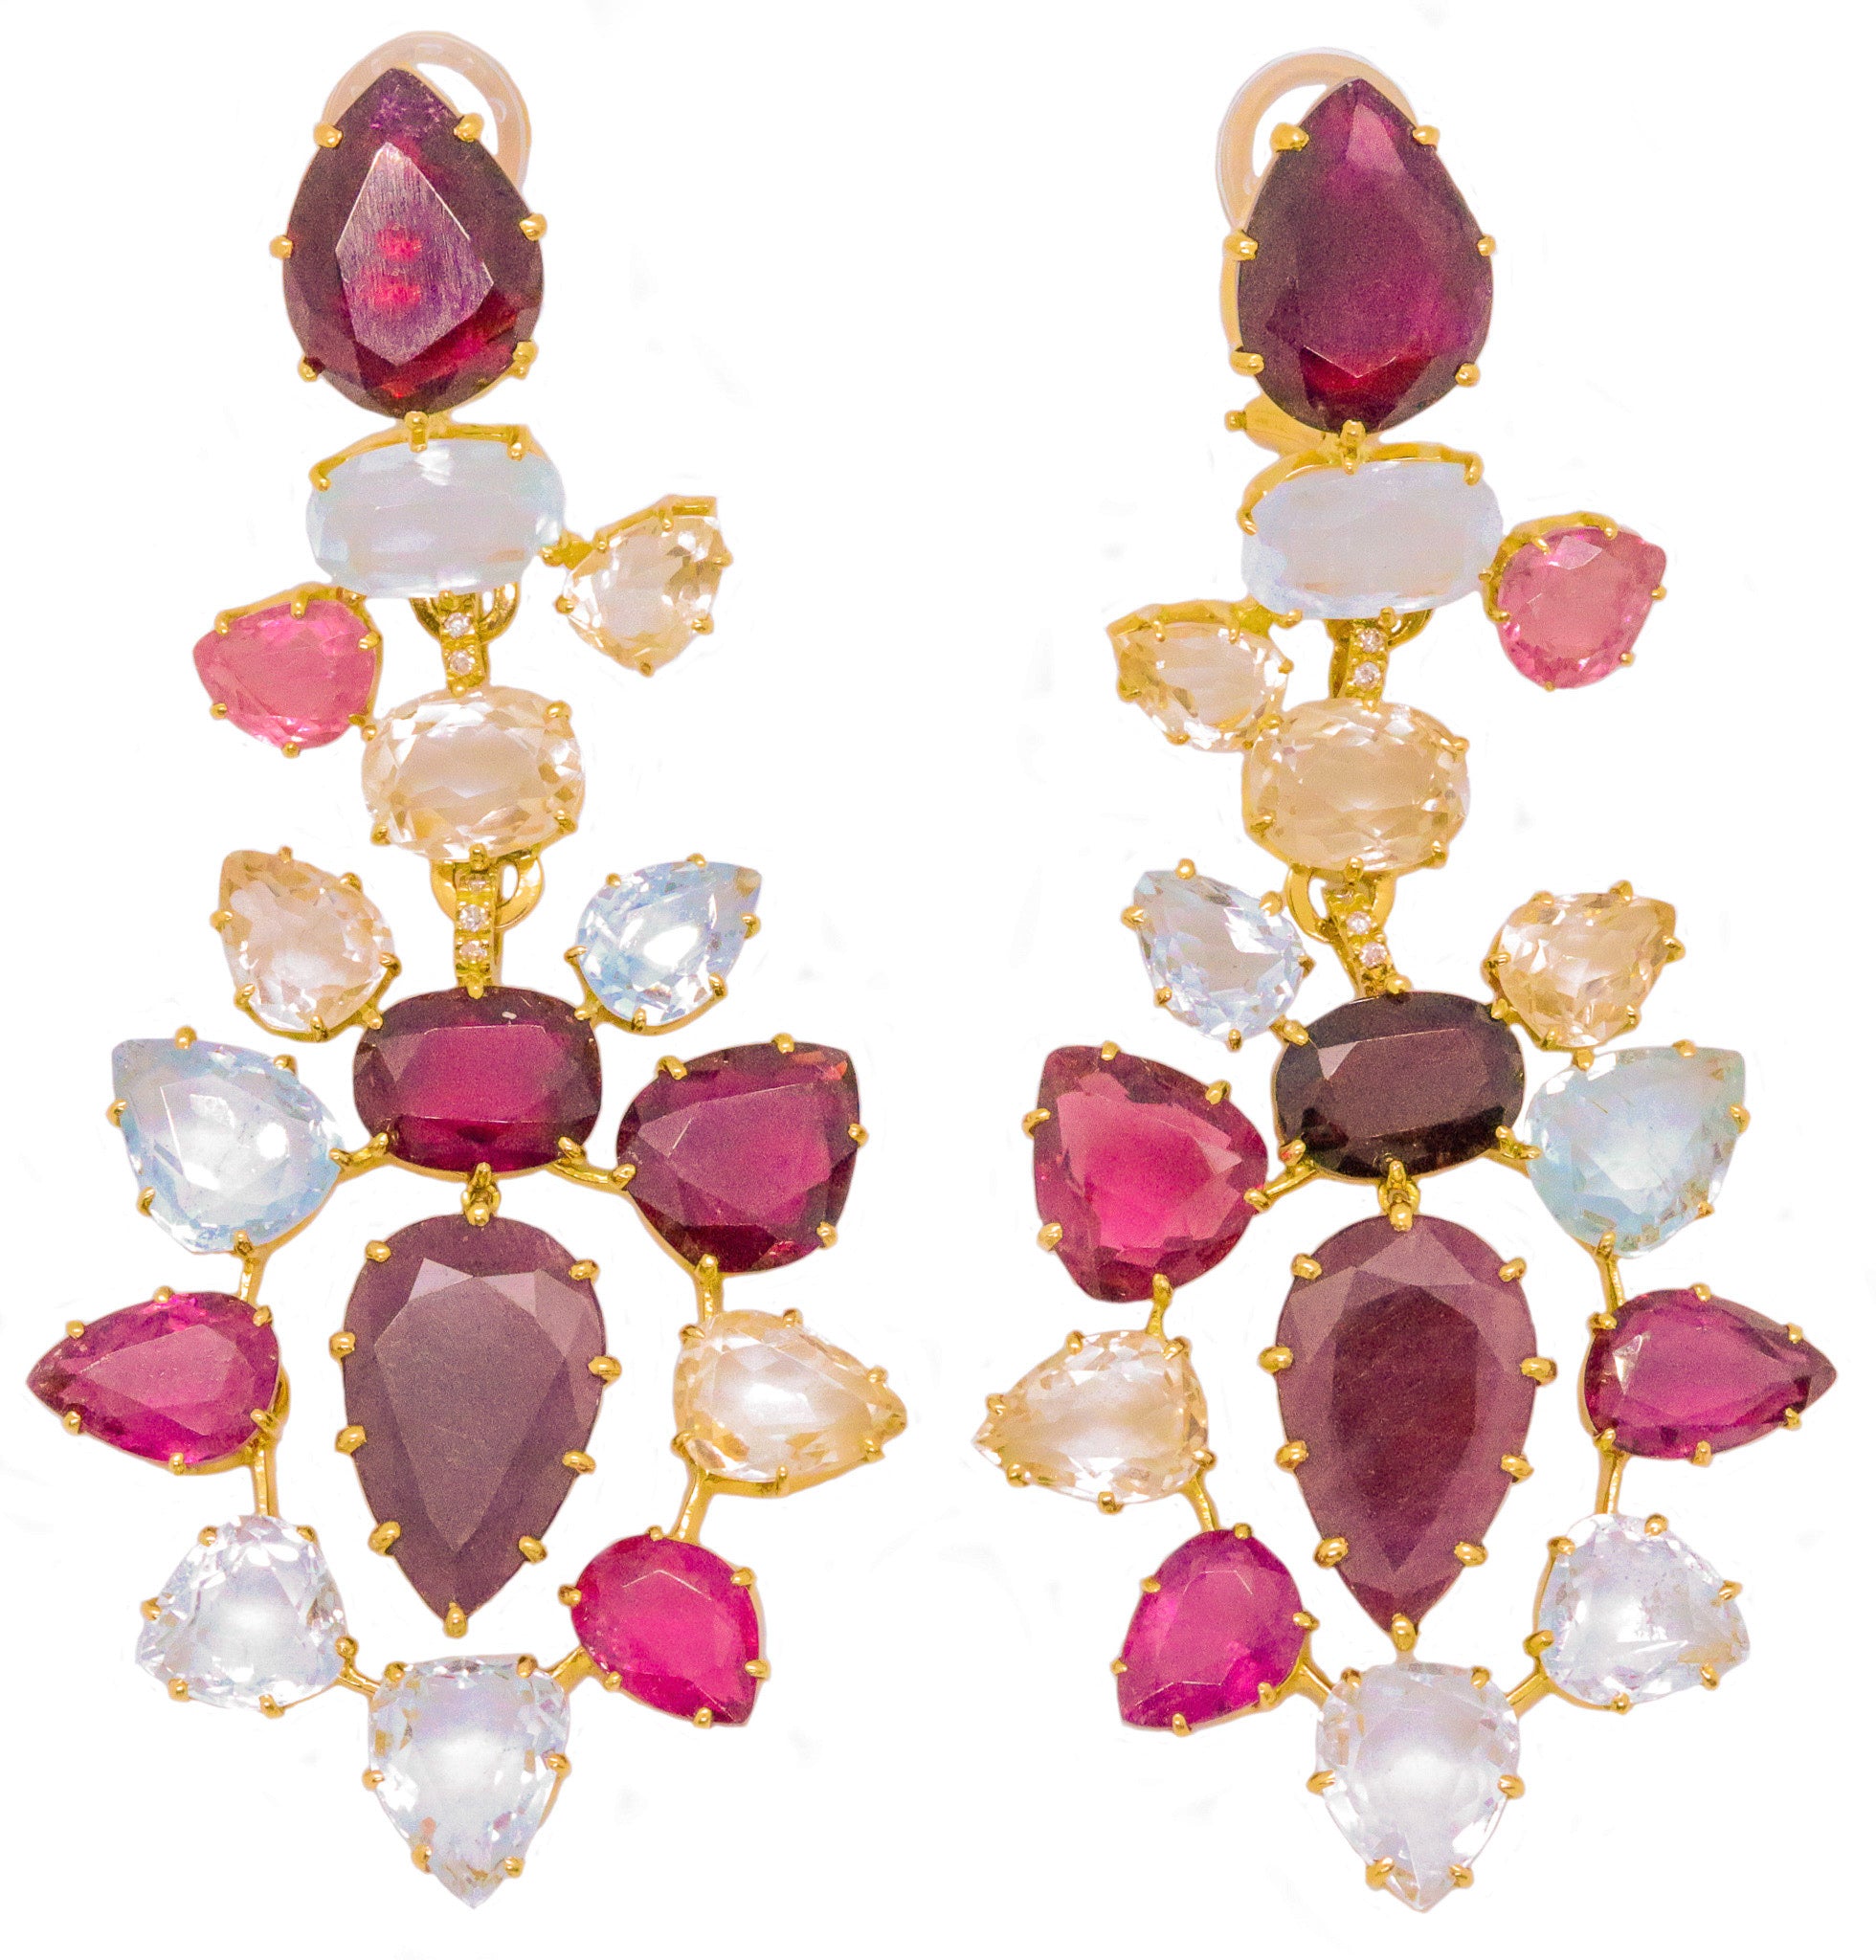 H. STERN 18 KT GOLD HARMONY JEWELED EARRINGS BY DIANE VON FURSTENBERG 67.7 CARATS